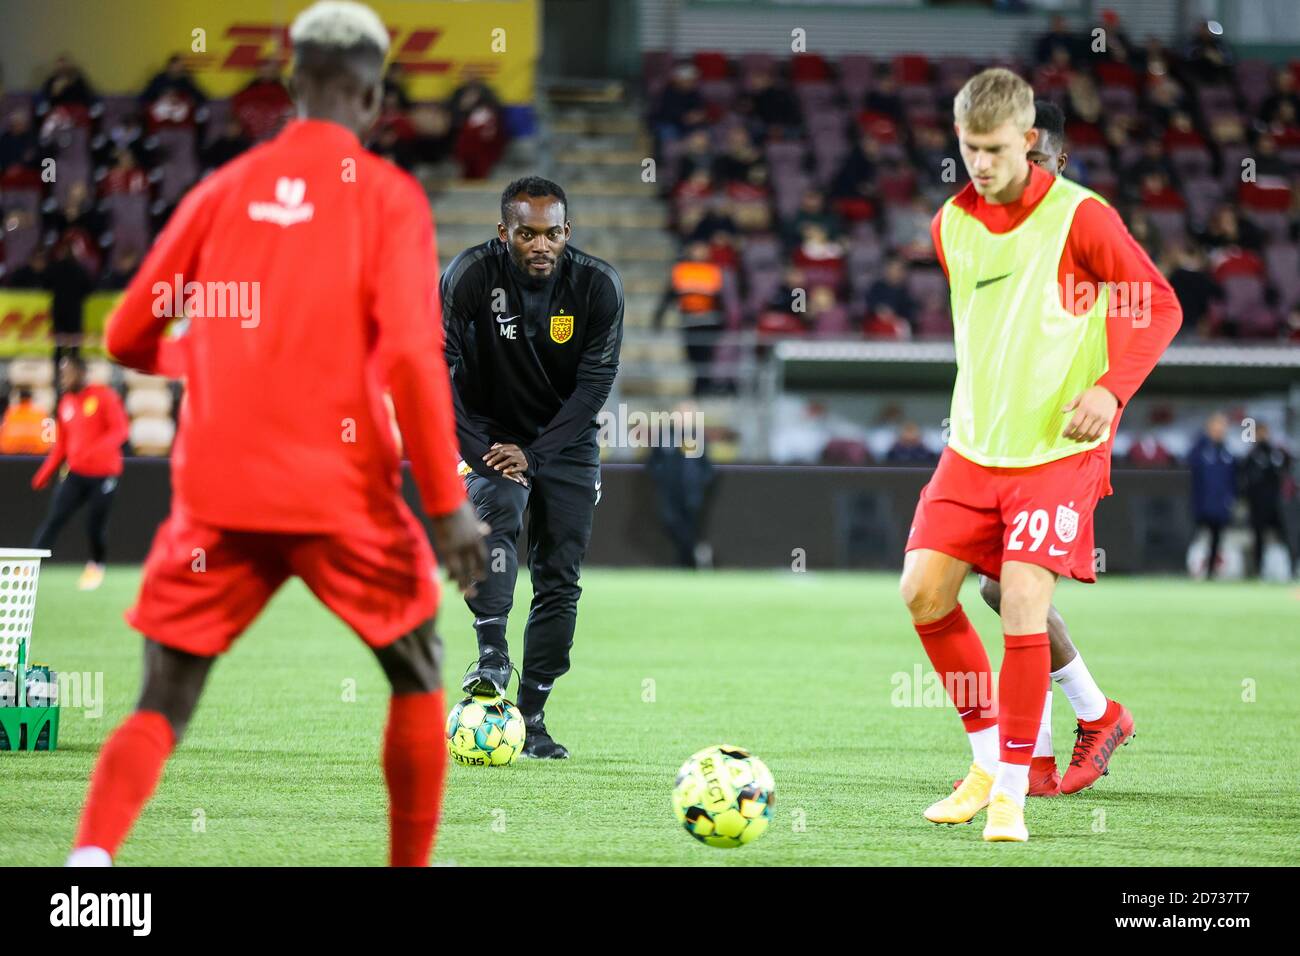 Farum, Denmark. 19th, October 2020. Michael Essien of FC Nordsjaelland is keeping an eye one the players during warmup before the 3F Superliga match between FC Nordsjaelland and Randers FC in Right to Dream Park in Farum. (Photo credit: Gonzales Photo - Dejan Obretkovic). Stock Photo